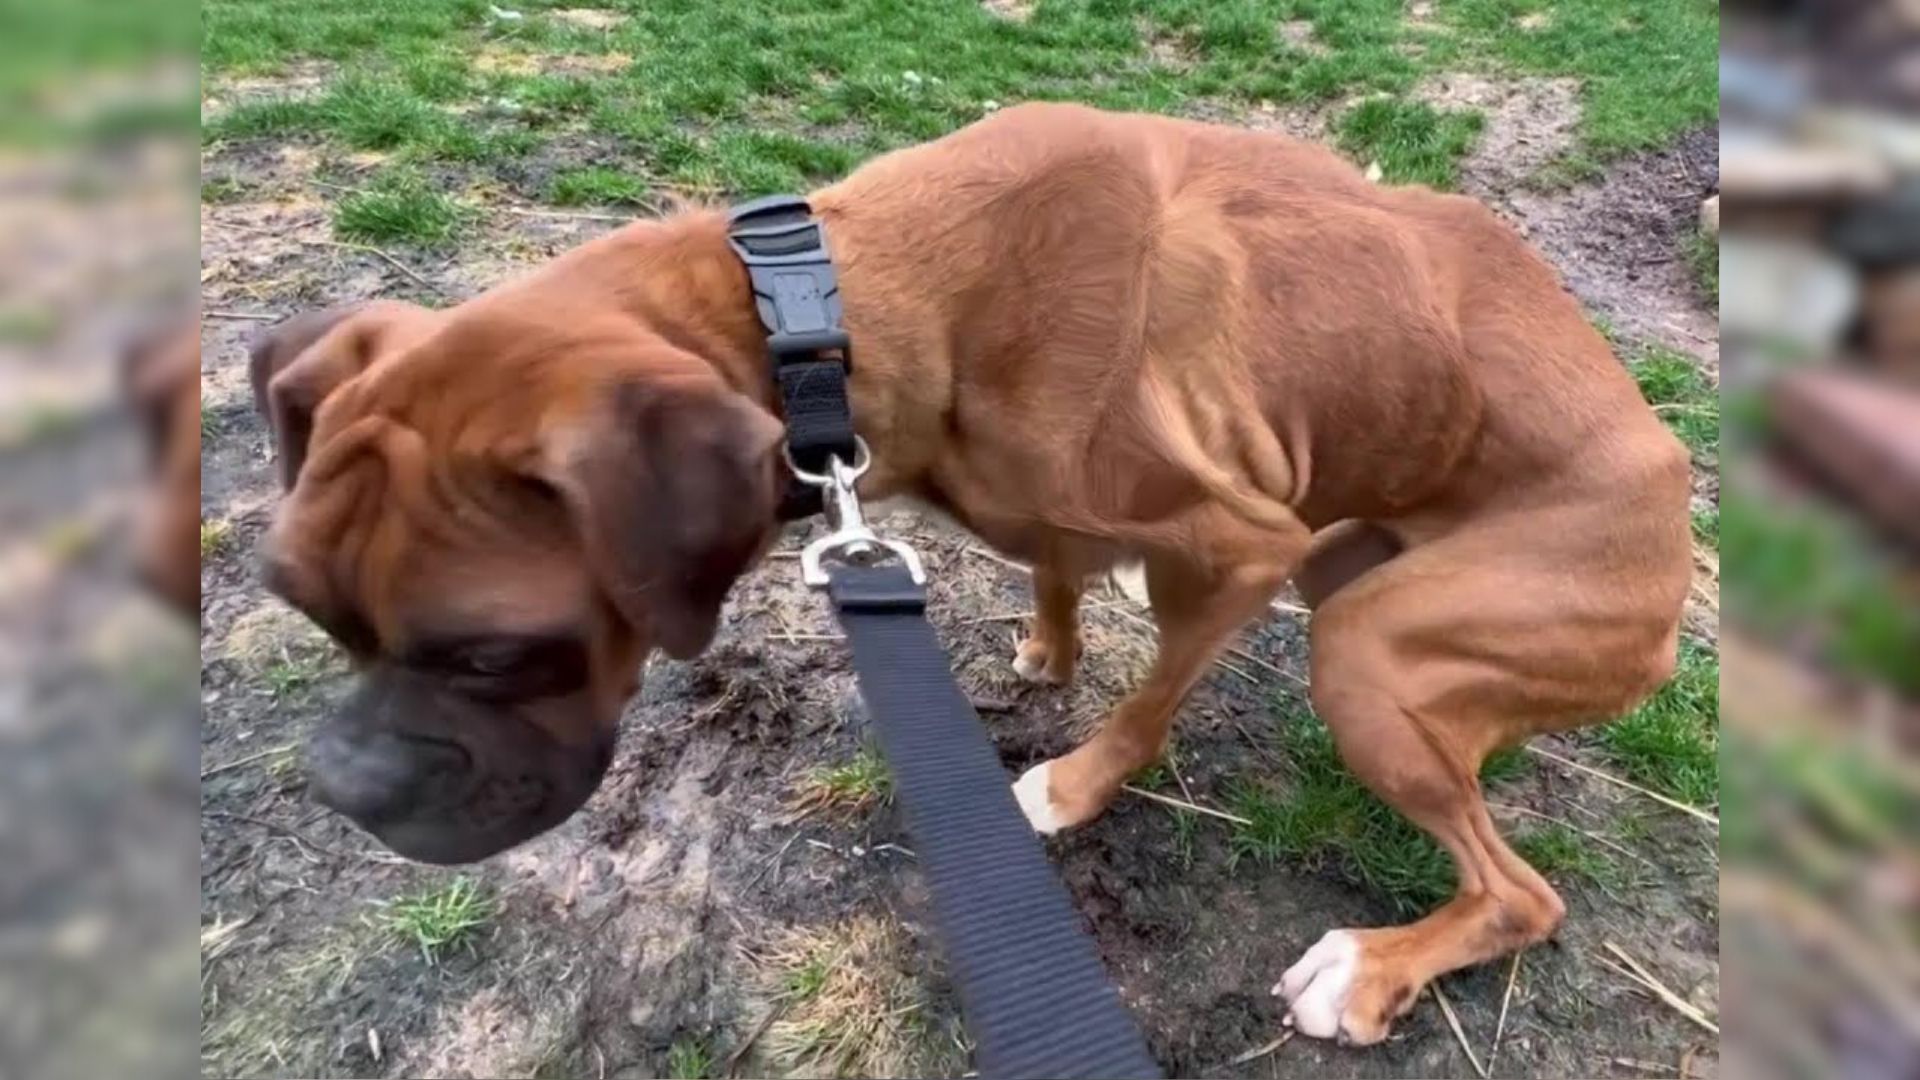 Heartbroken Puppy Mill Dog Who Kept Trembling With Fear Discovers Love And Finds Happiness